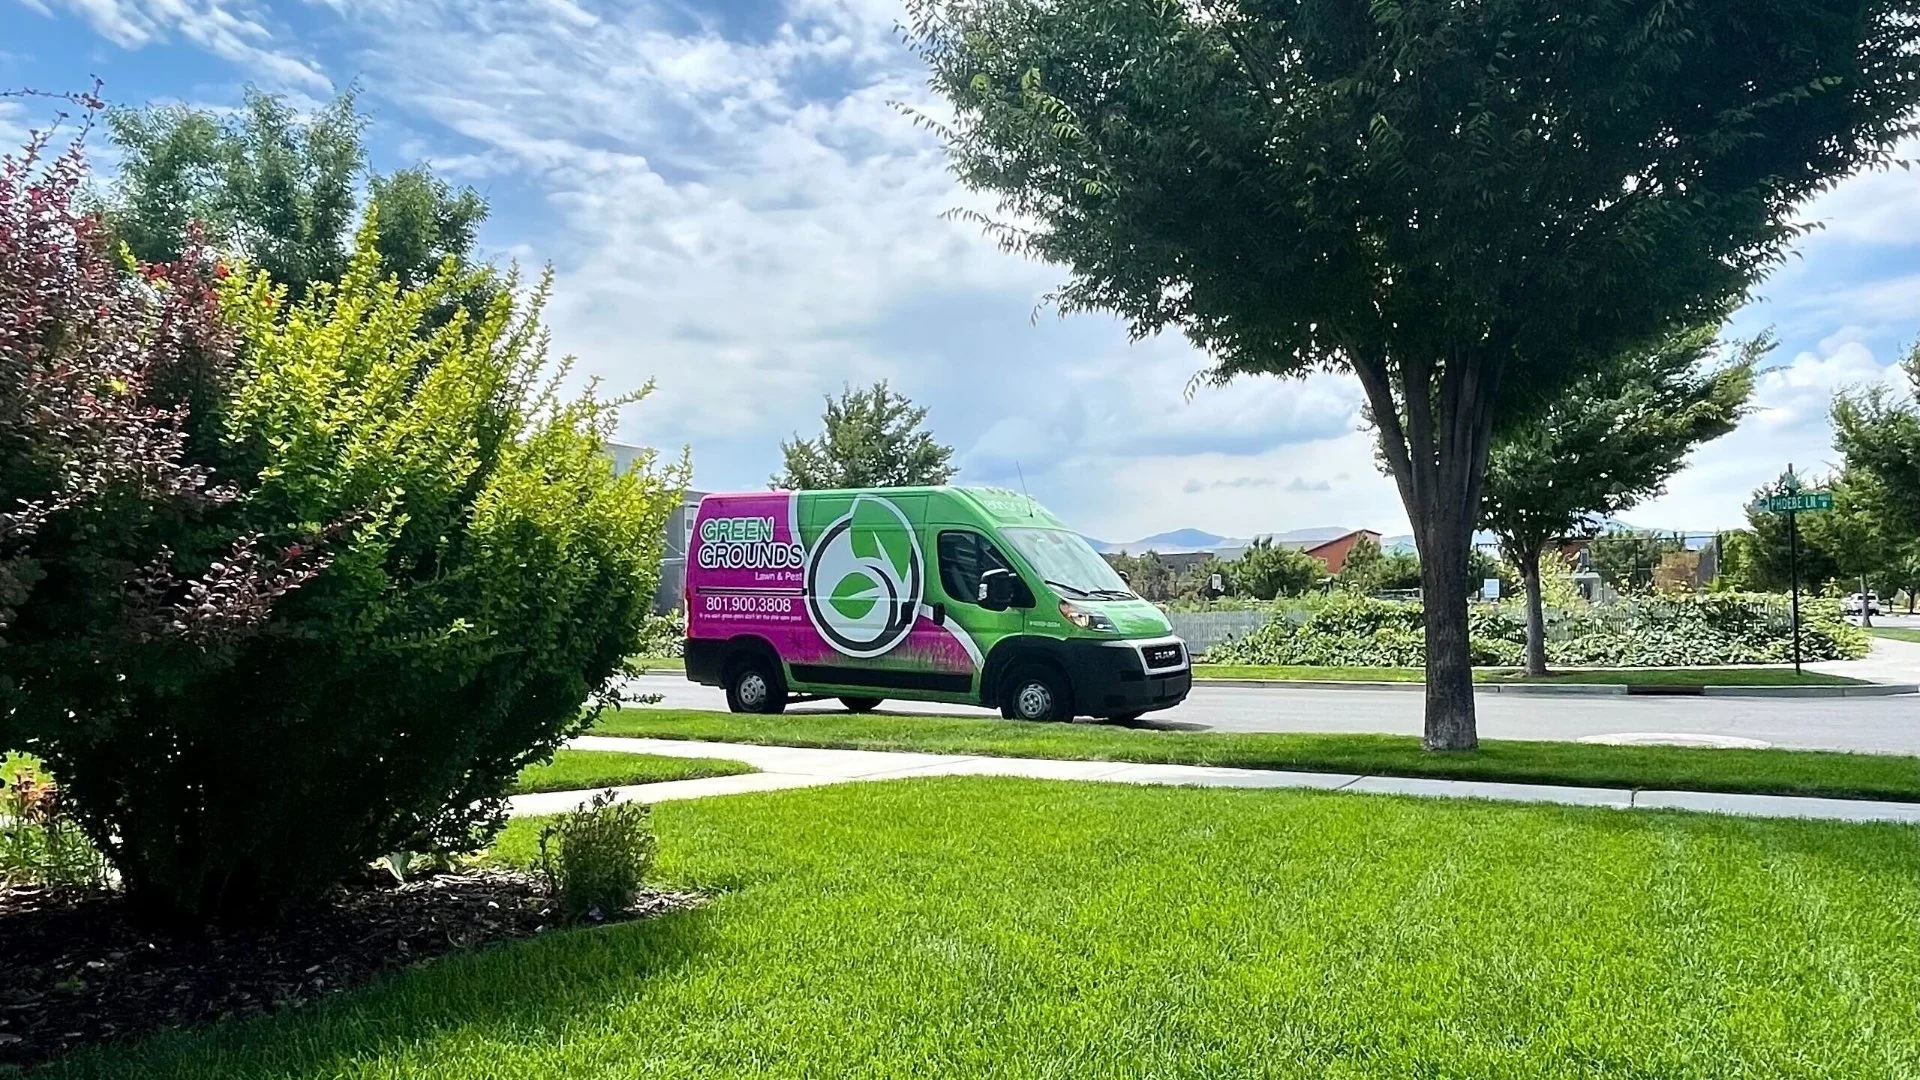 Green Grounds Lawn & Pest van at customer's home in Midway, UT.